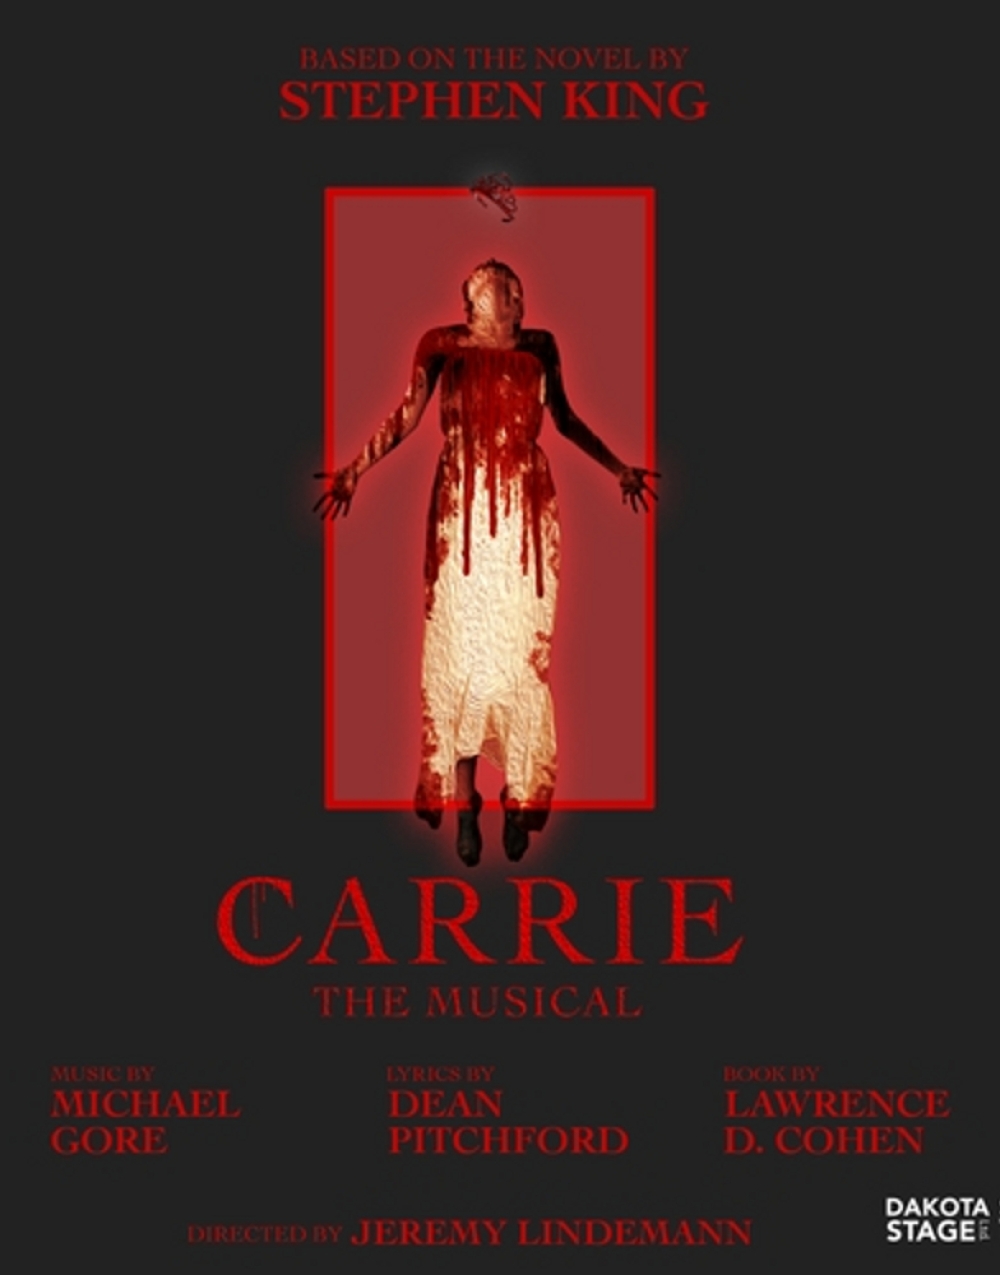 Carrie: The Musical - Dakota Stage, Ltd. Stage Mag